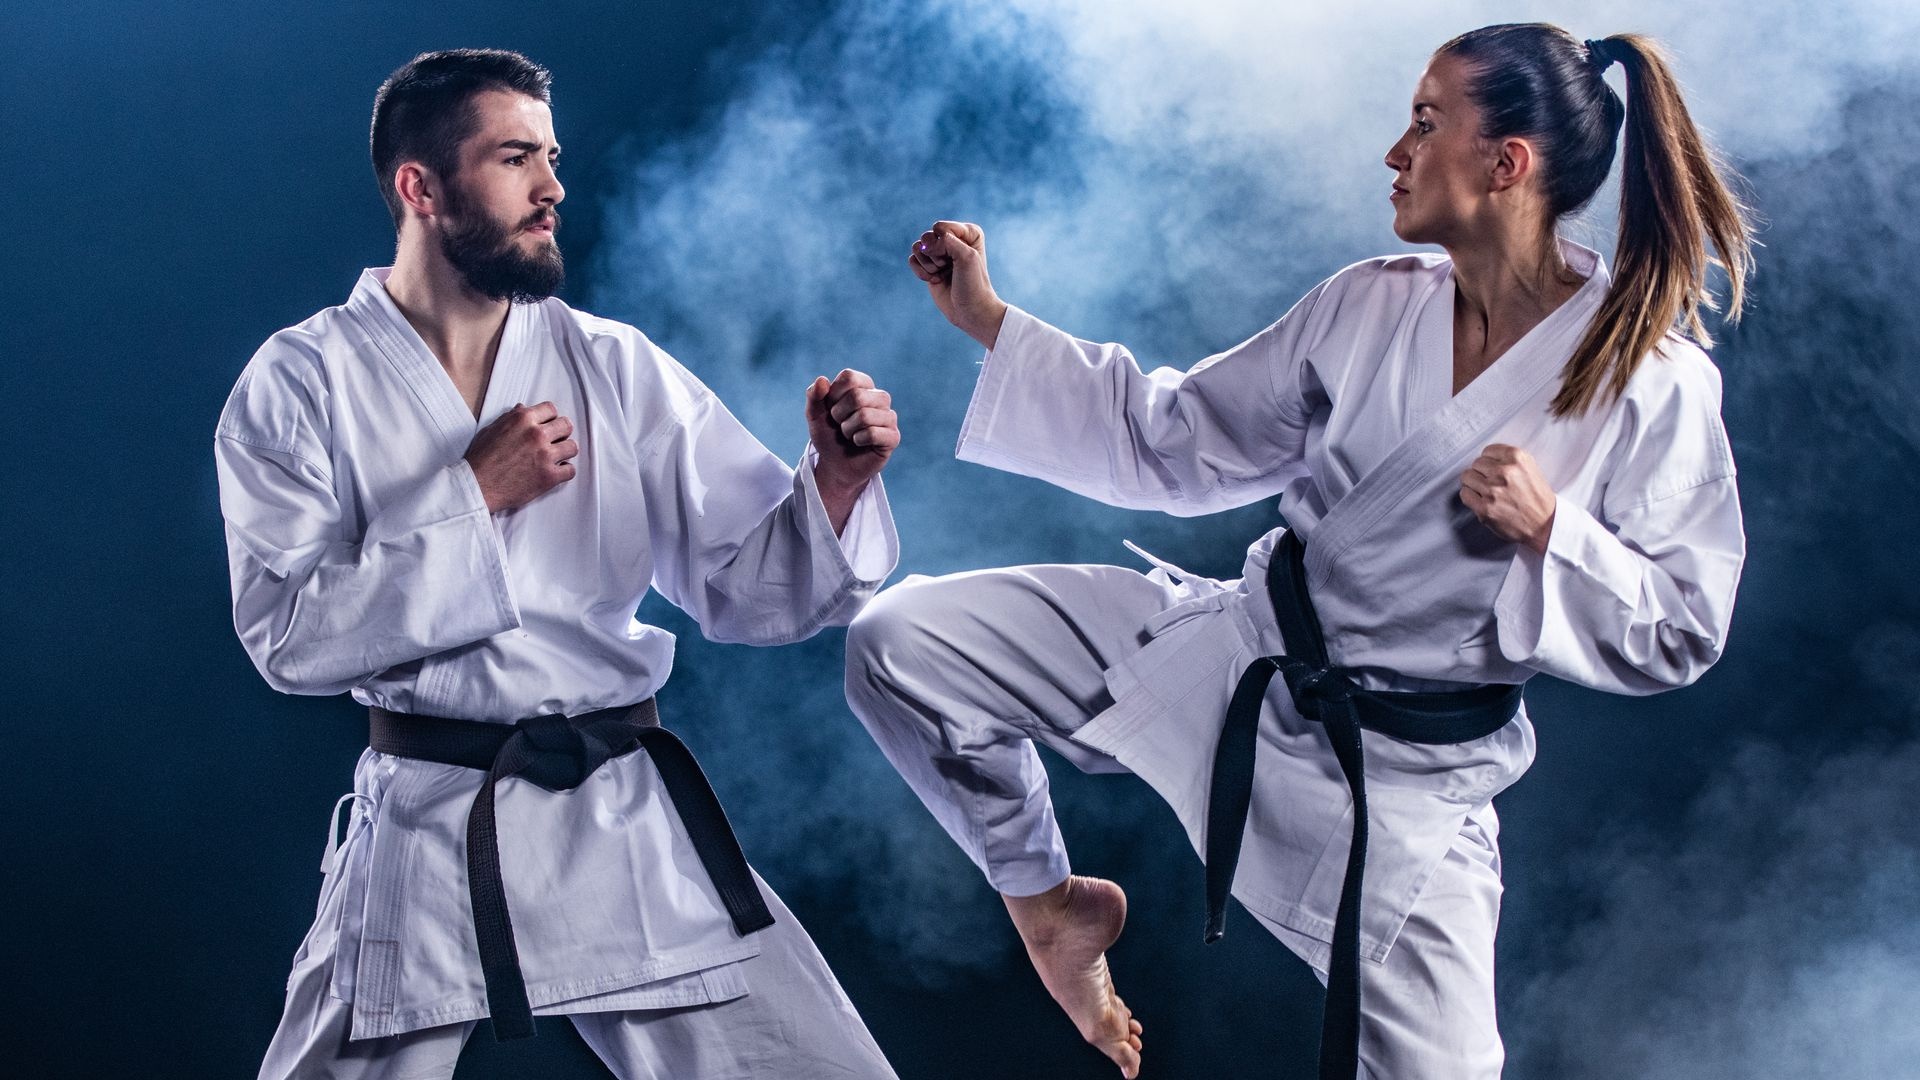 Karate: Kyokushin style of stand-up fighting, Competitive combat sport. 1920x1080 Full HD Wallpaper.